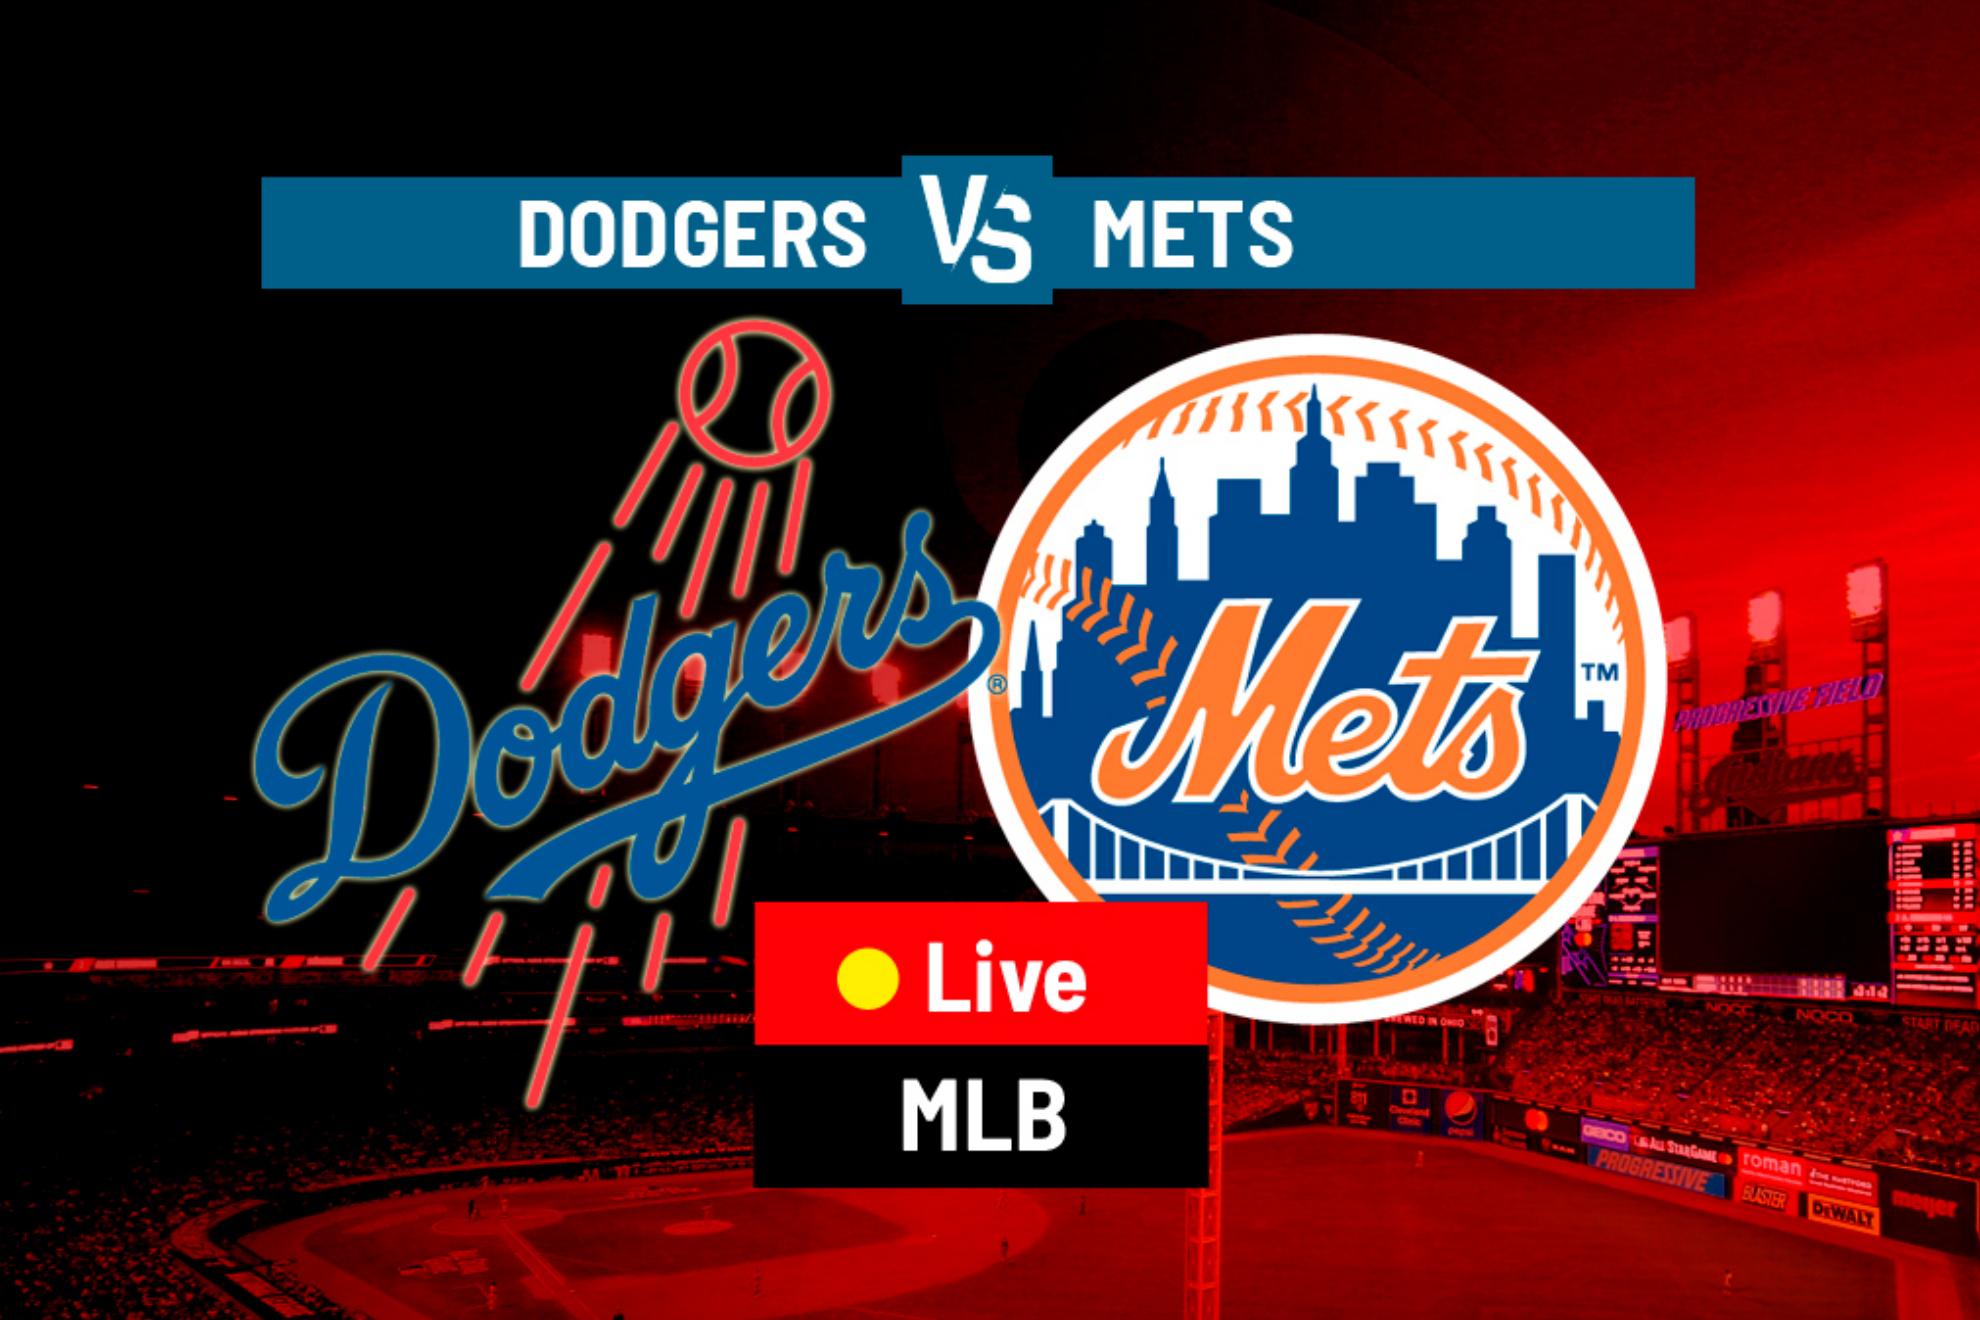 Dodgers 4-3 Mets LIVE: Score and highlights